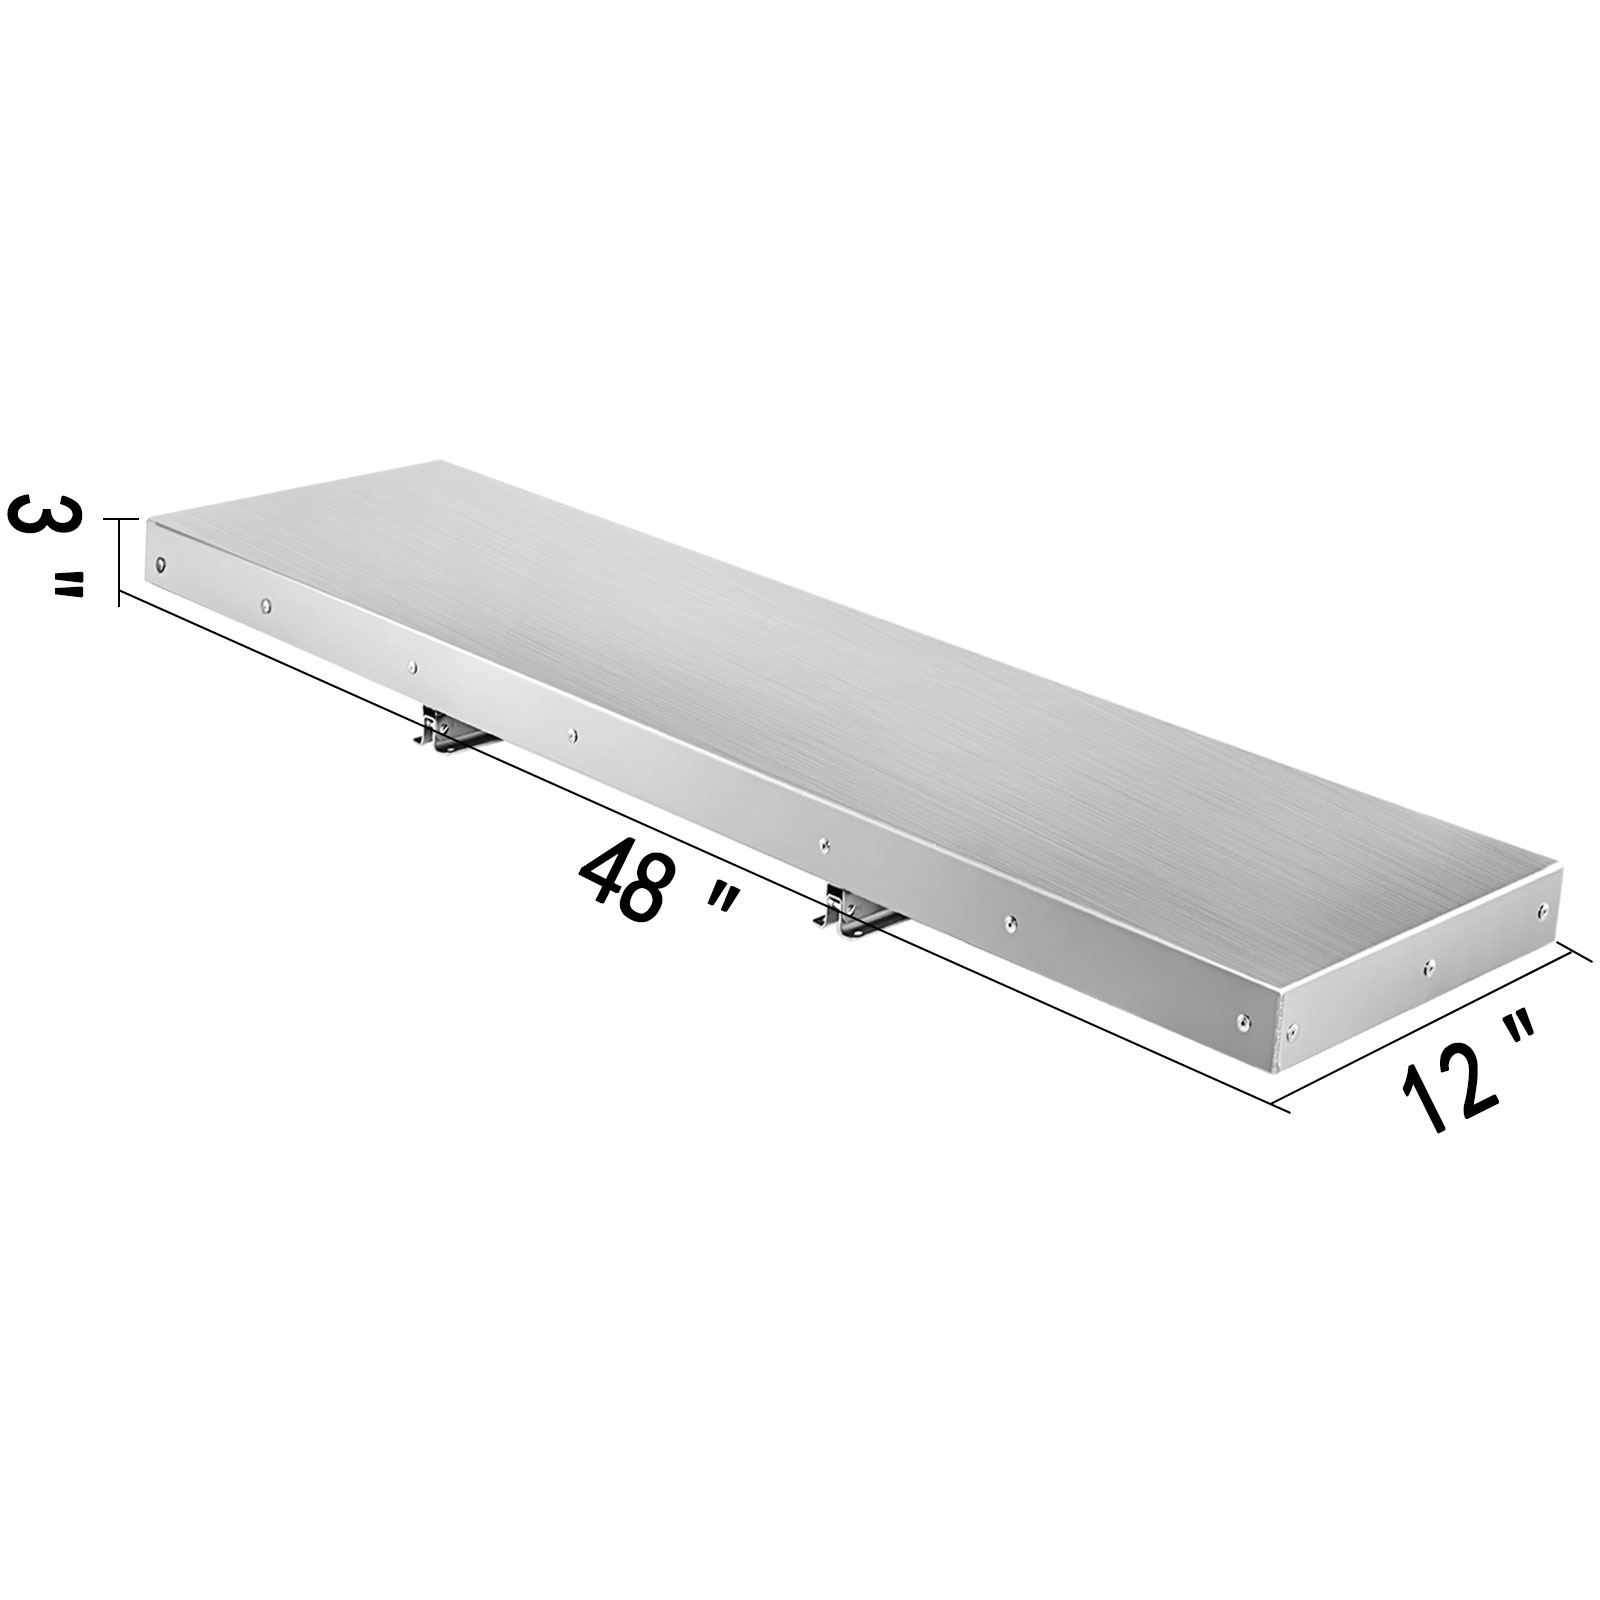 4FT Shelf for Concession Window Food Truck Accessories Business Aluminum Alloy 